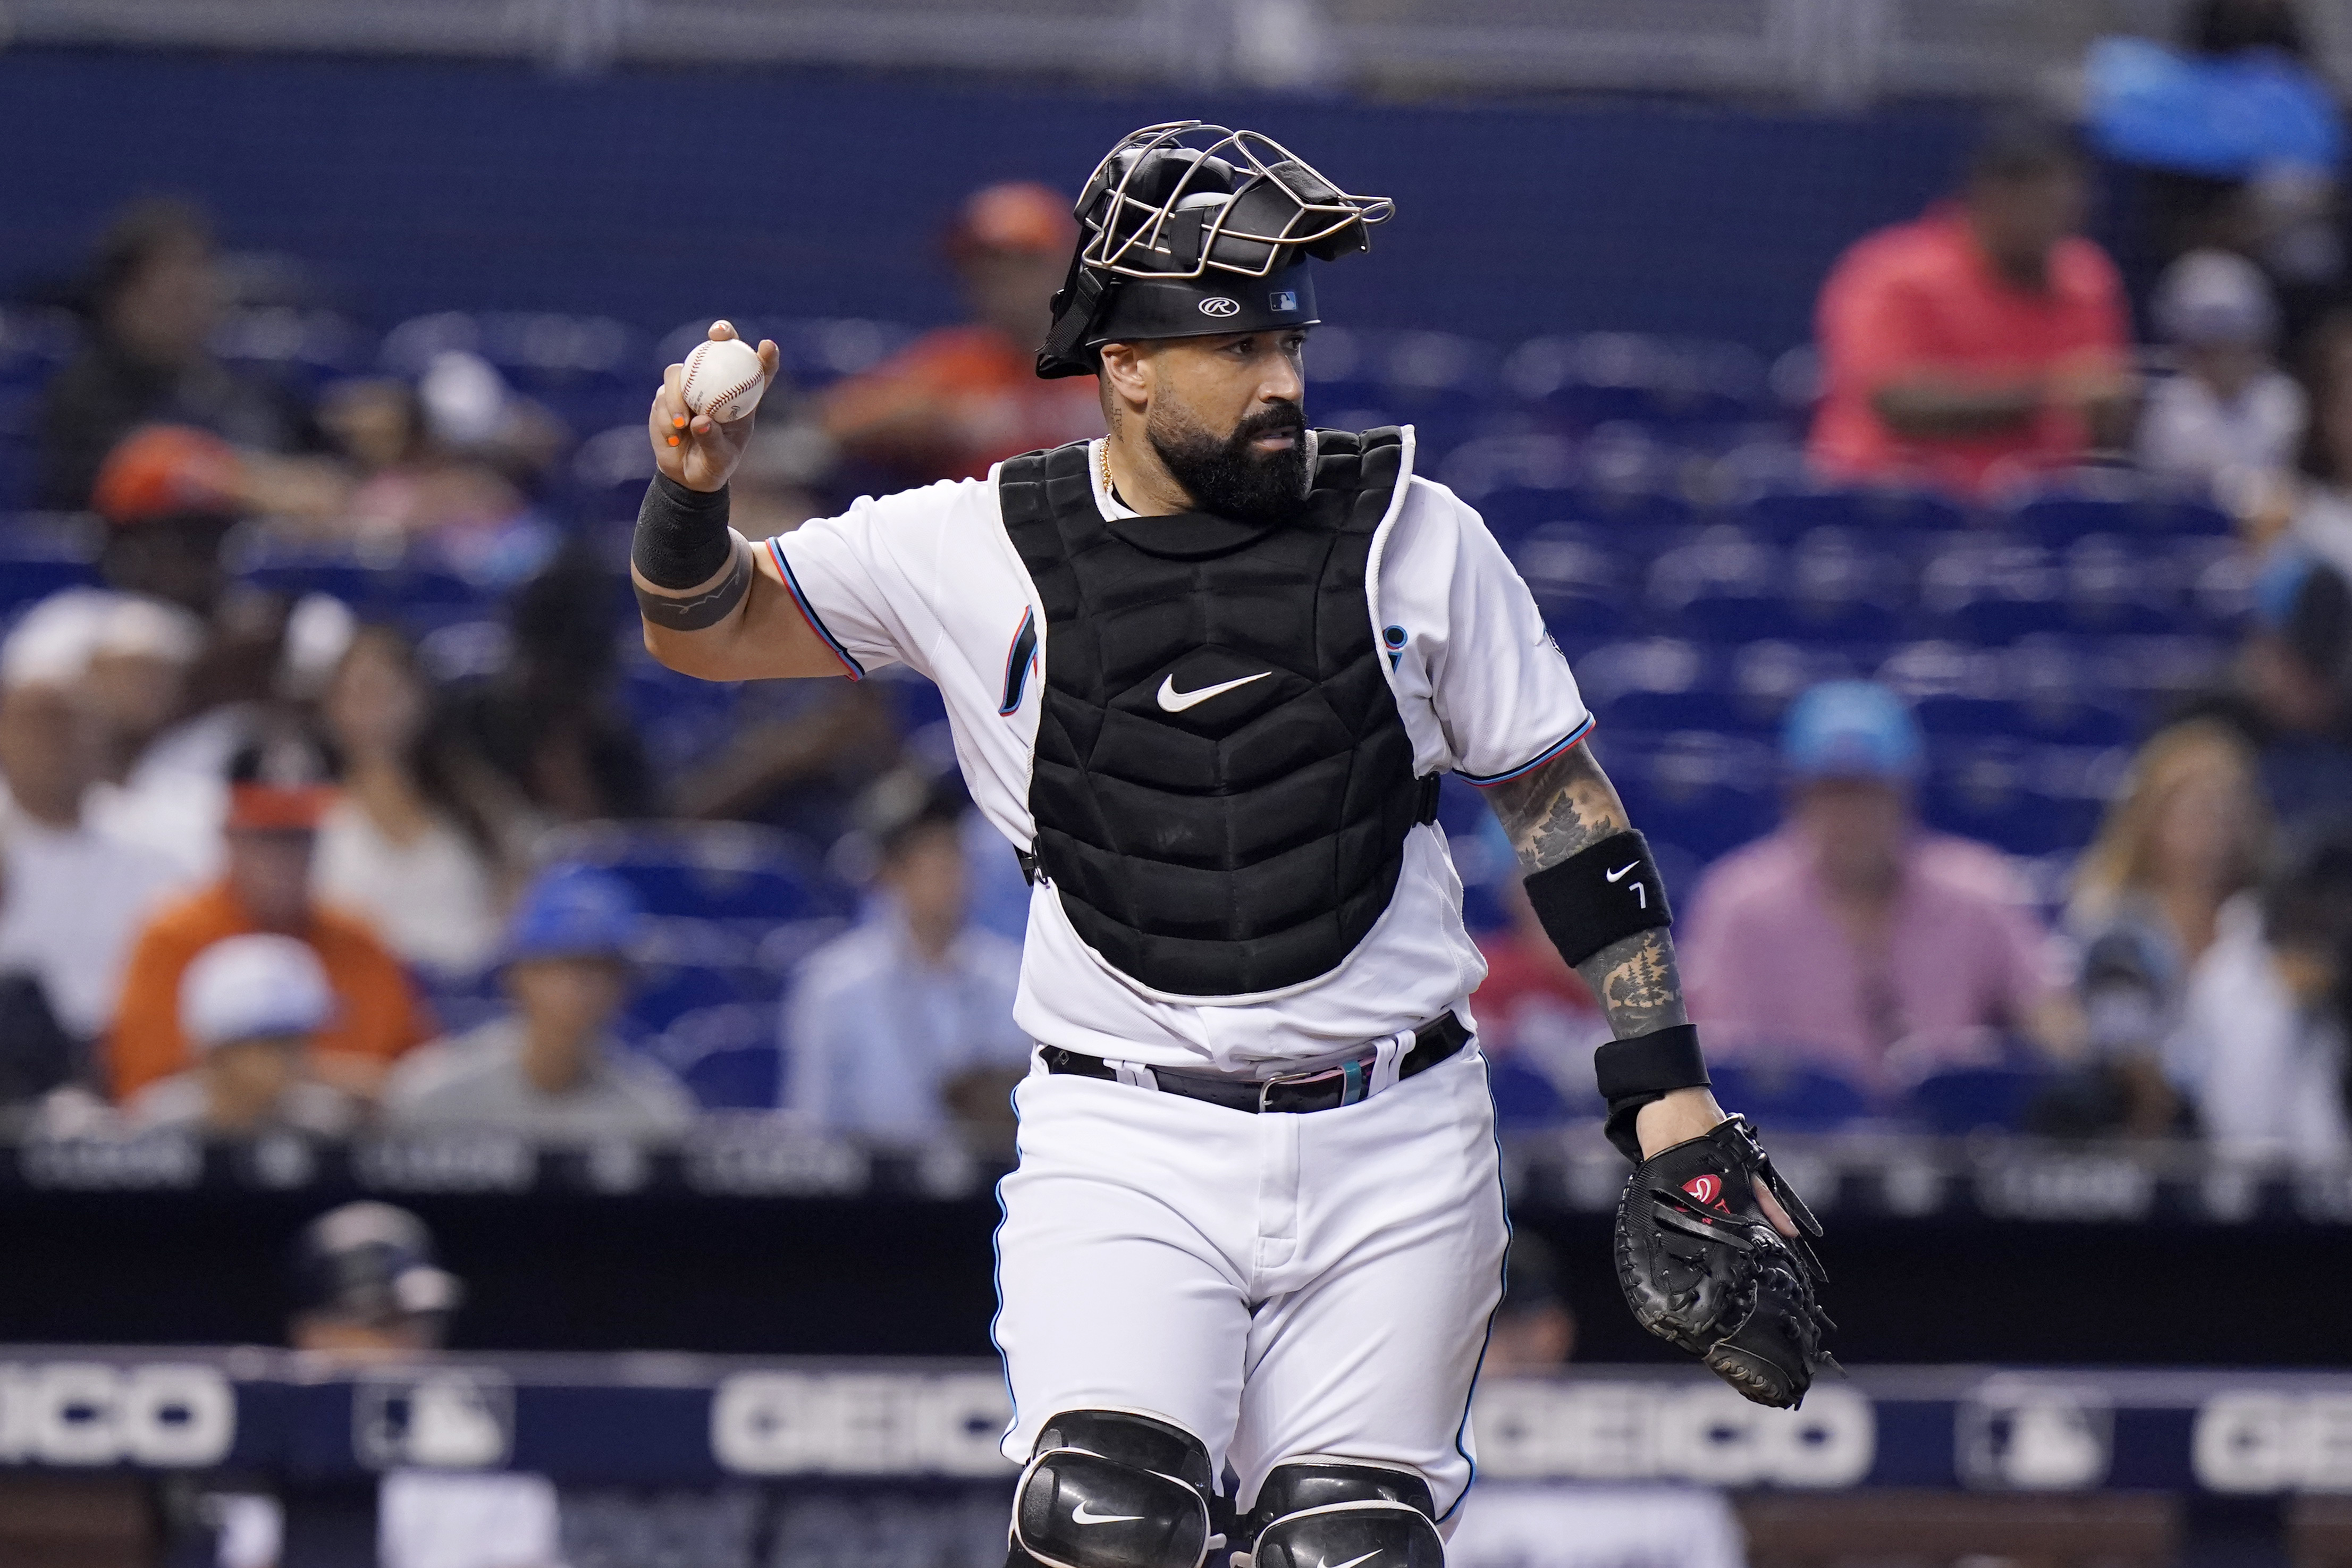 Yankees catcher Kyle Higashioka was a solid backup option in 2022